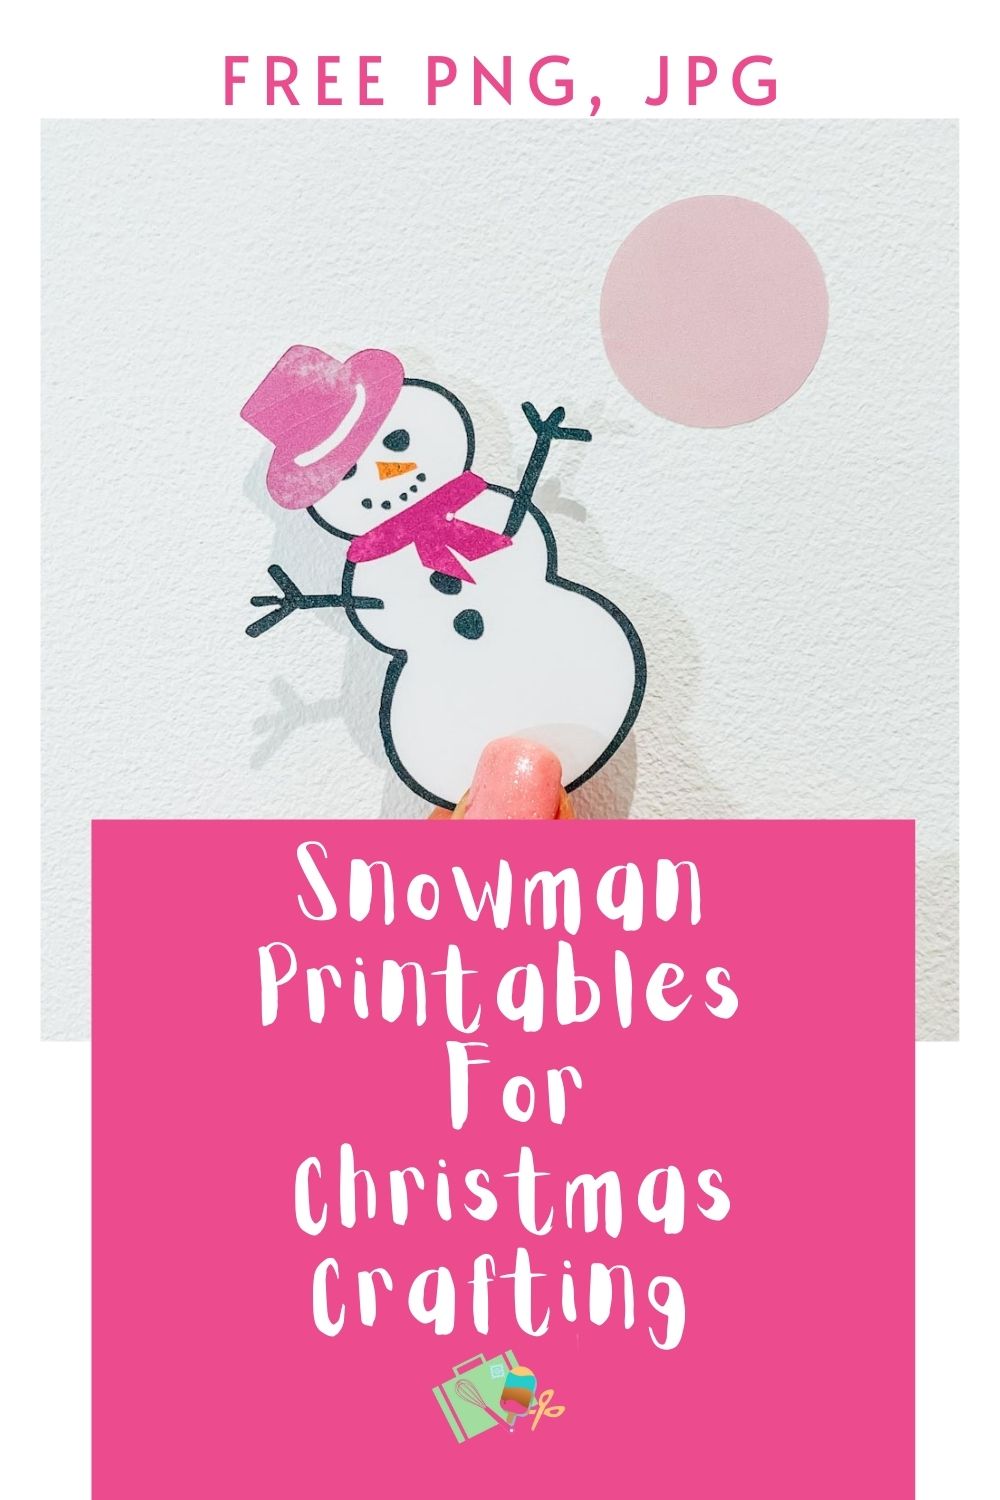 Cute Snowman PNG Jpg head for Christmas Crafting Projects With Cricut and Silhouette